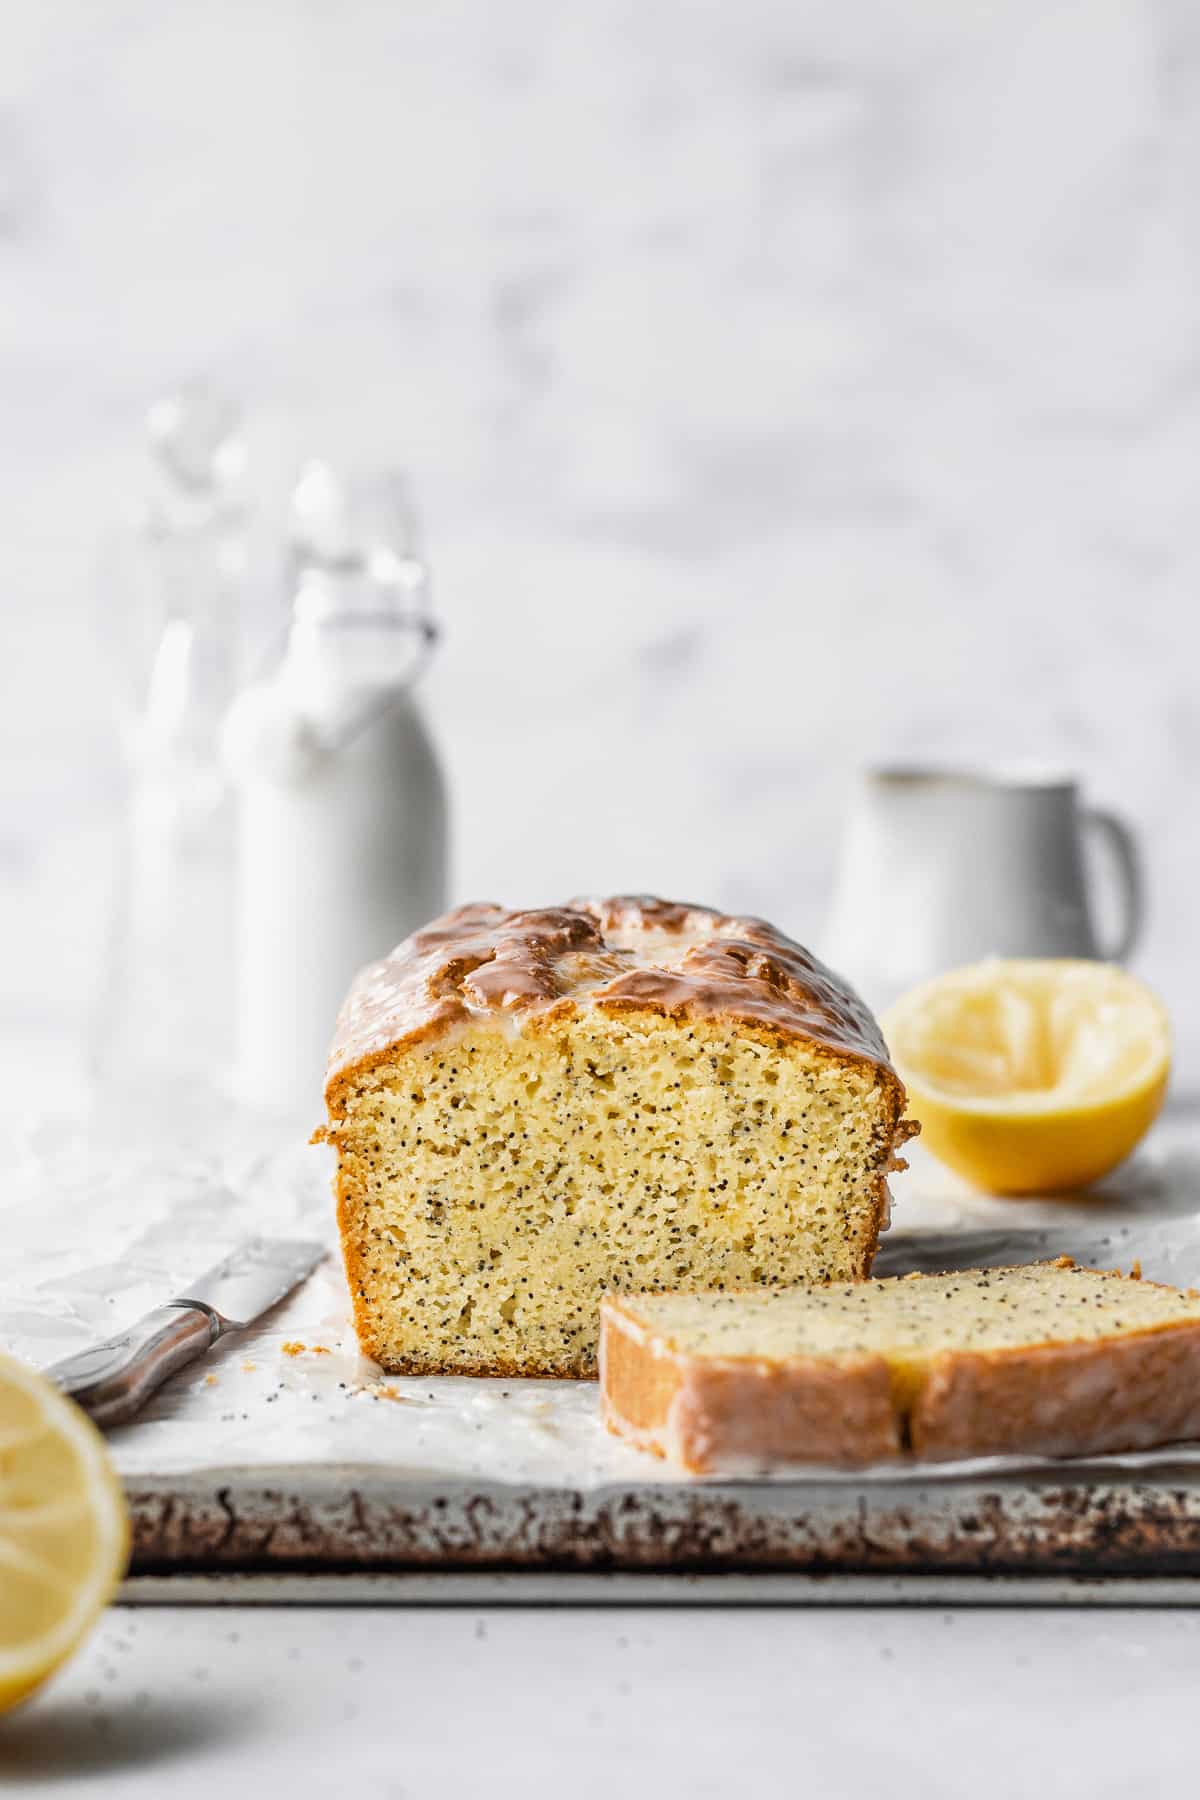 A sliced loaf of gluten free lemon poppy seed cake on a parchment paper with sliced lemons and milk jugs in the background.